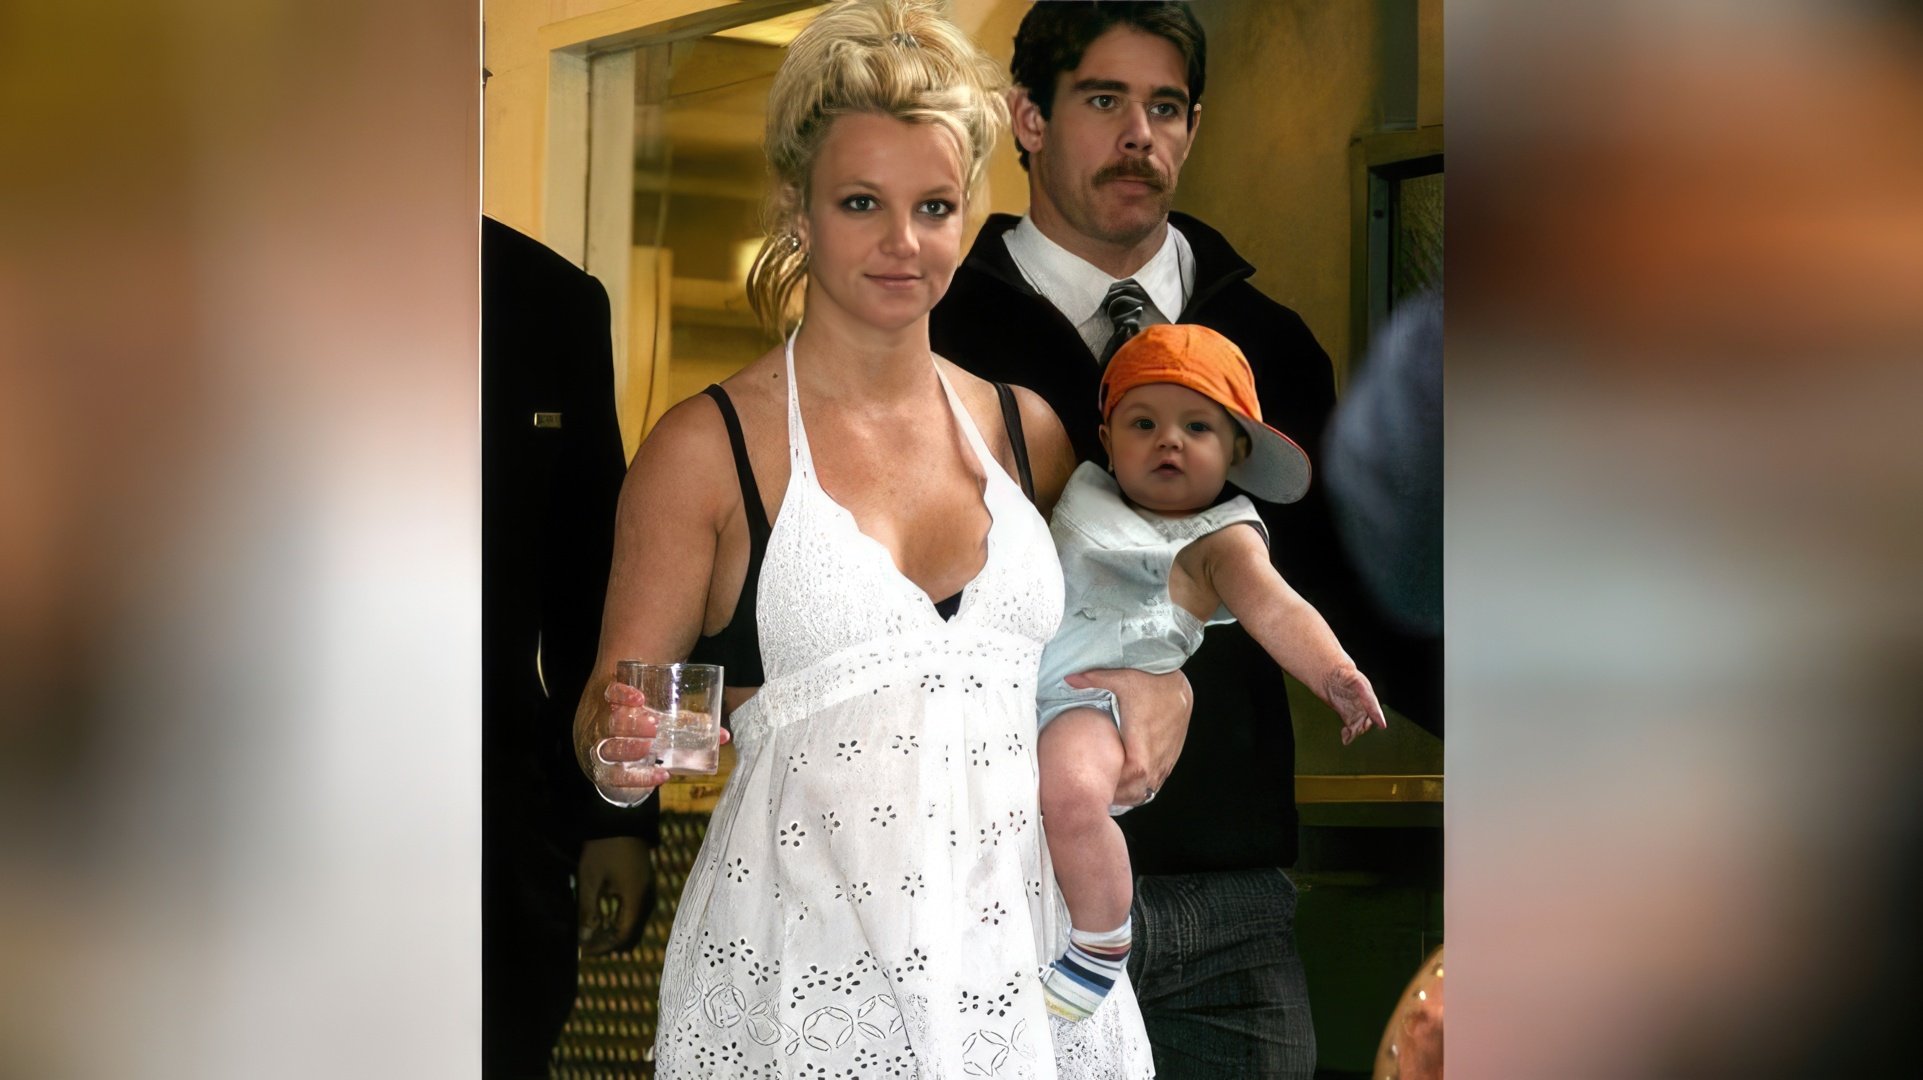 People were outraged by Britney's careless treatment of children